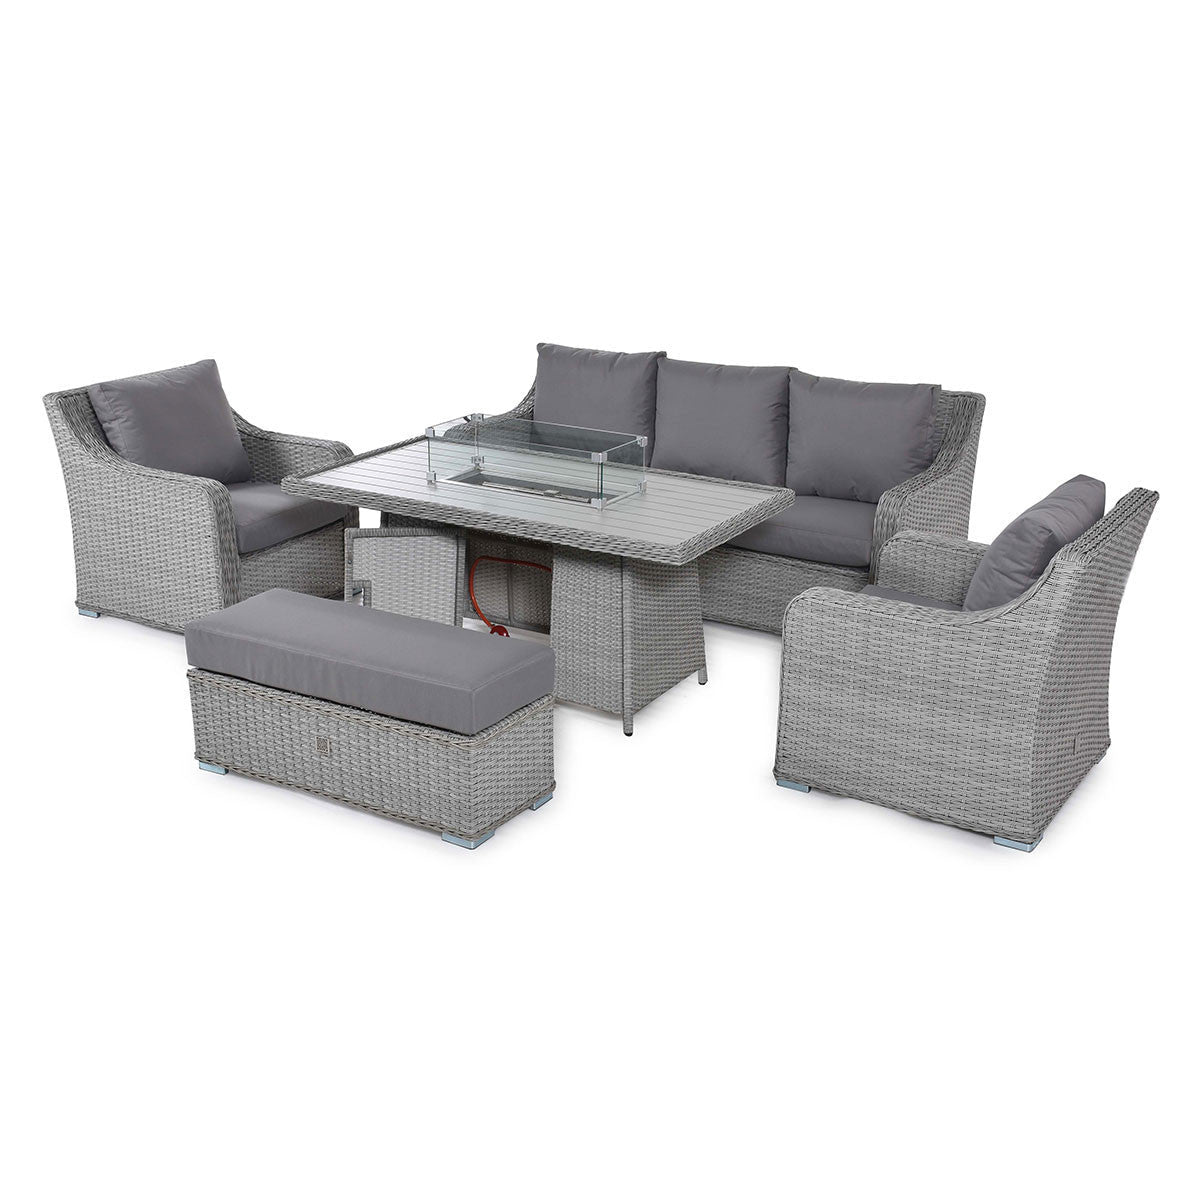 Ascot 3 Seat Sofa Dining Set with Fire Pit - Vookoo Lifestyle